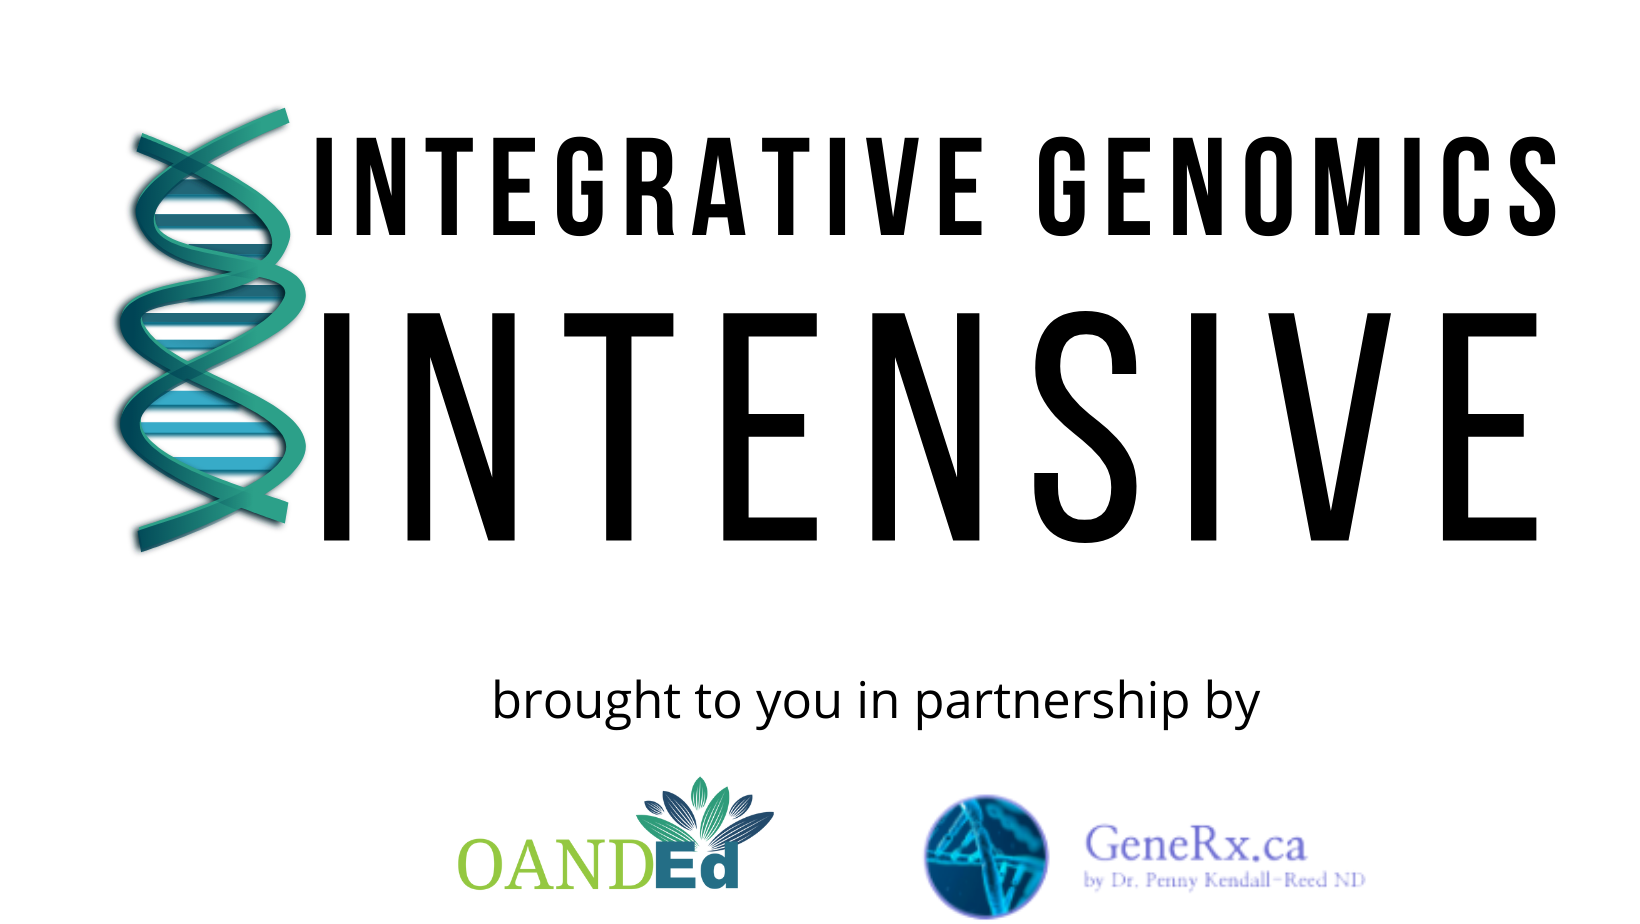 Integrative Genomics Intensive Brought to you by the OAND and GeneRx.ca